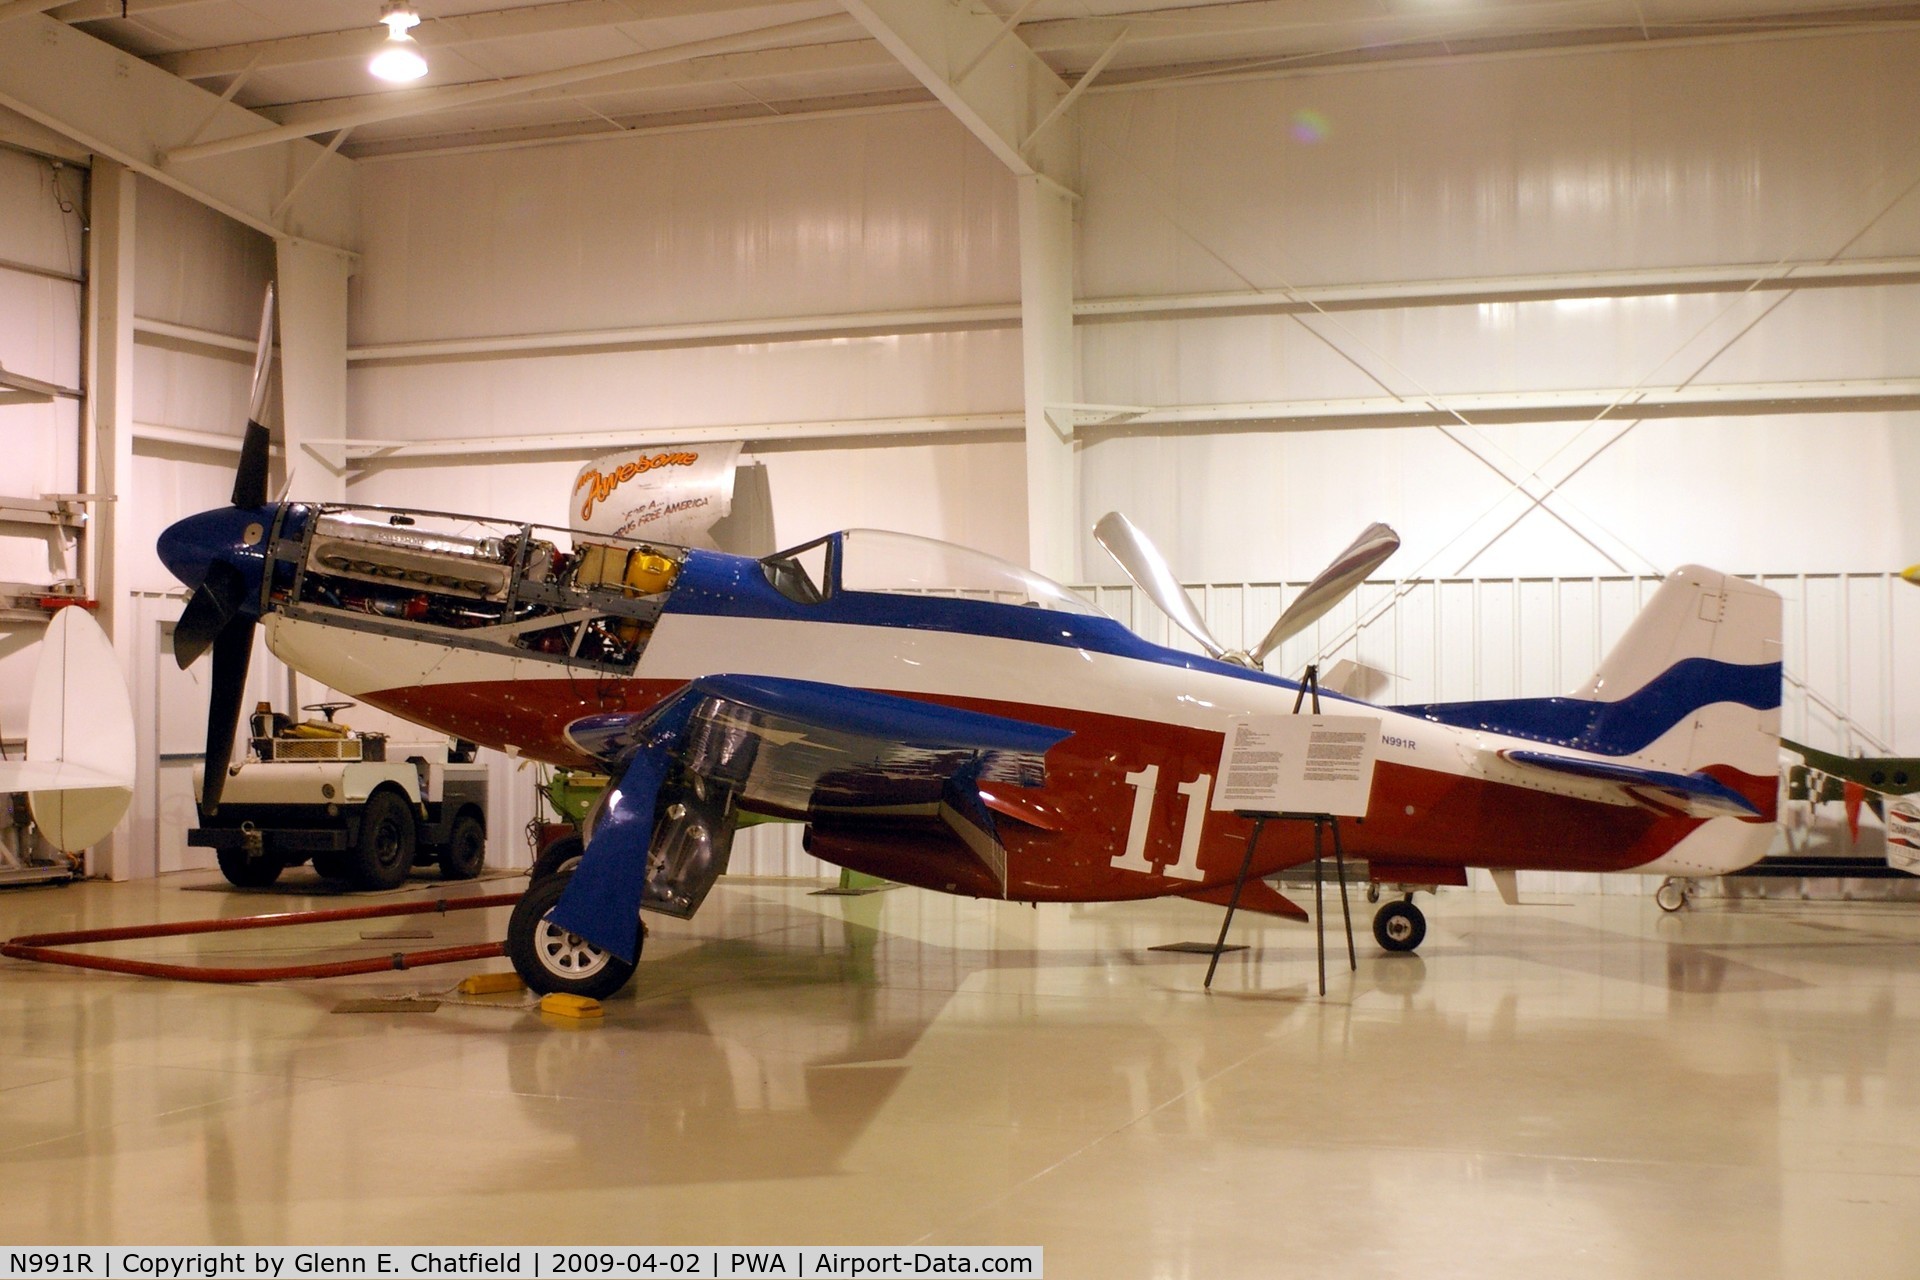 N991R, 1993 North American P-51D Mustang C/N 122-41076, Merlin open for maintenance, at the Oklahoma Museum of Flying